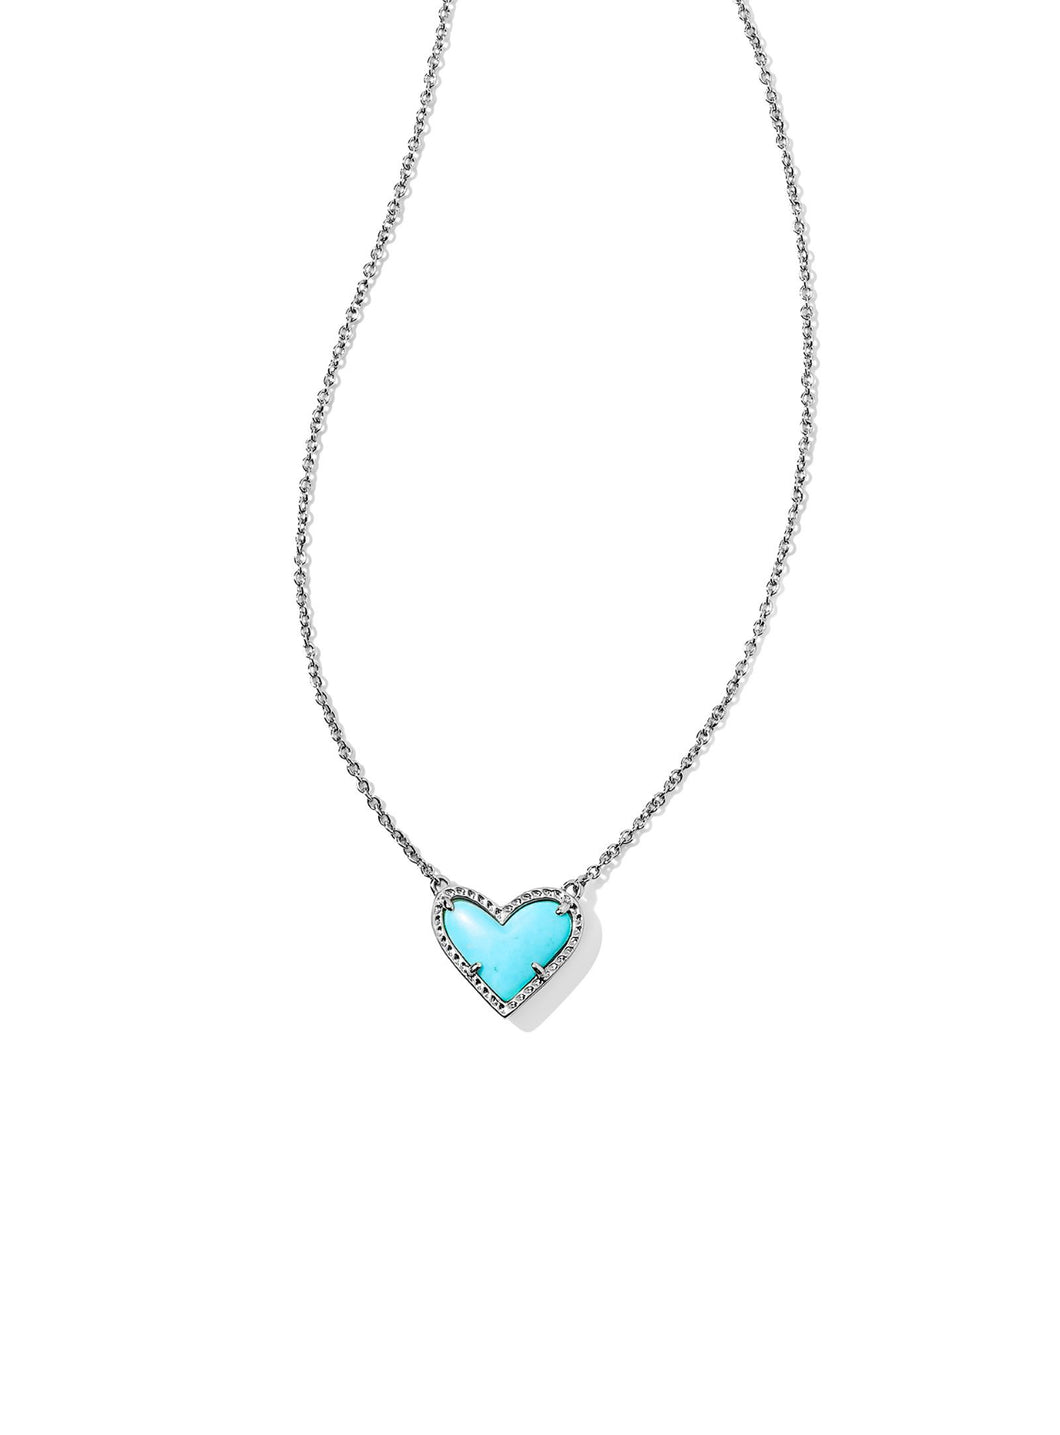 Kendra Scott: Ari Heart Necklace in Silver Turquoise